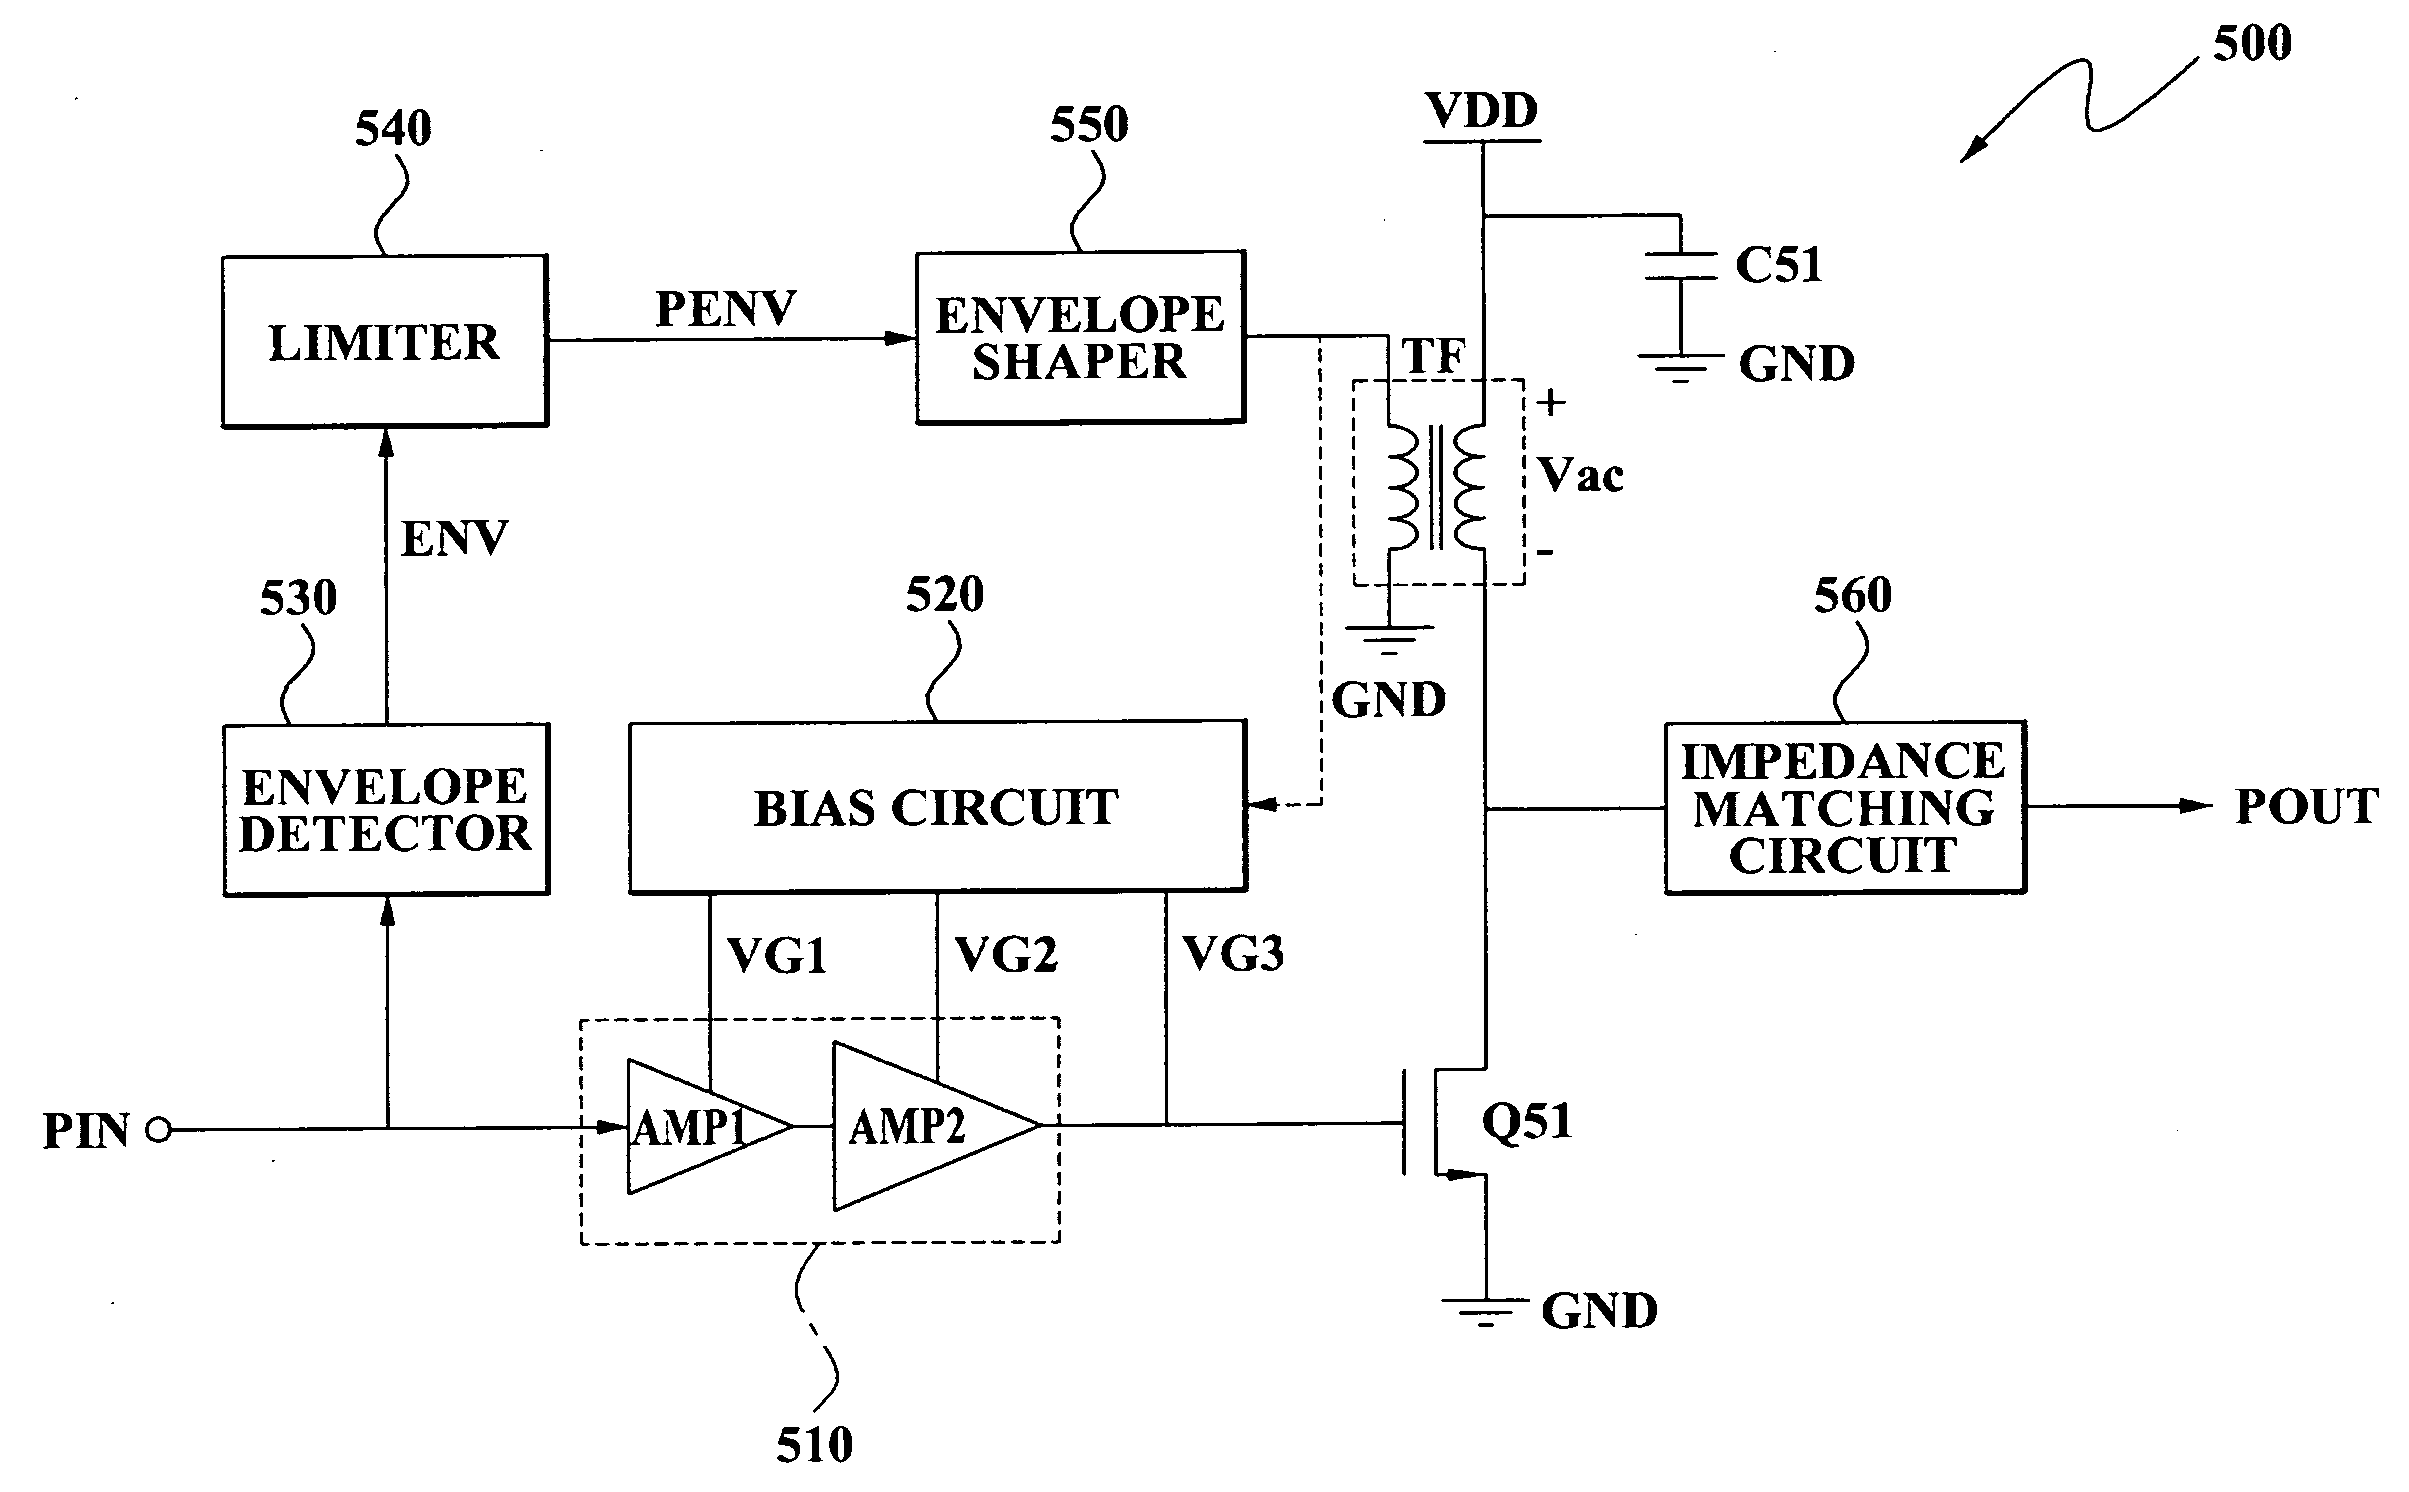 Power amplifier circuit for peak envelope modulation of high frequency signal